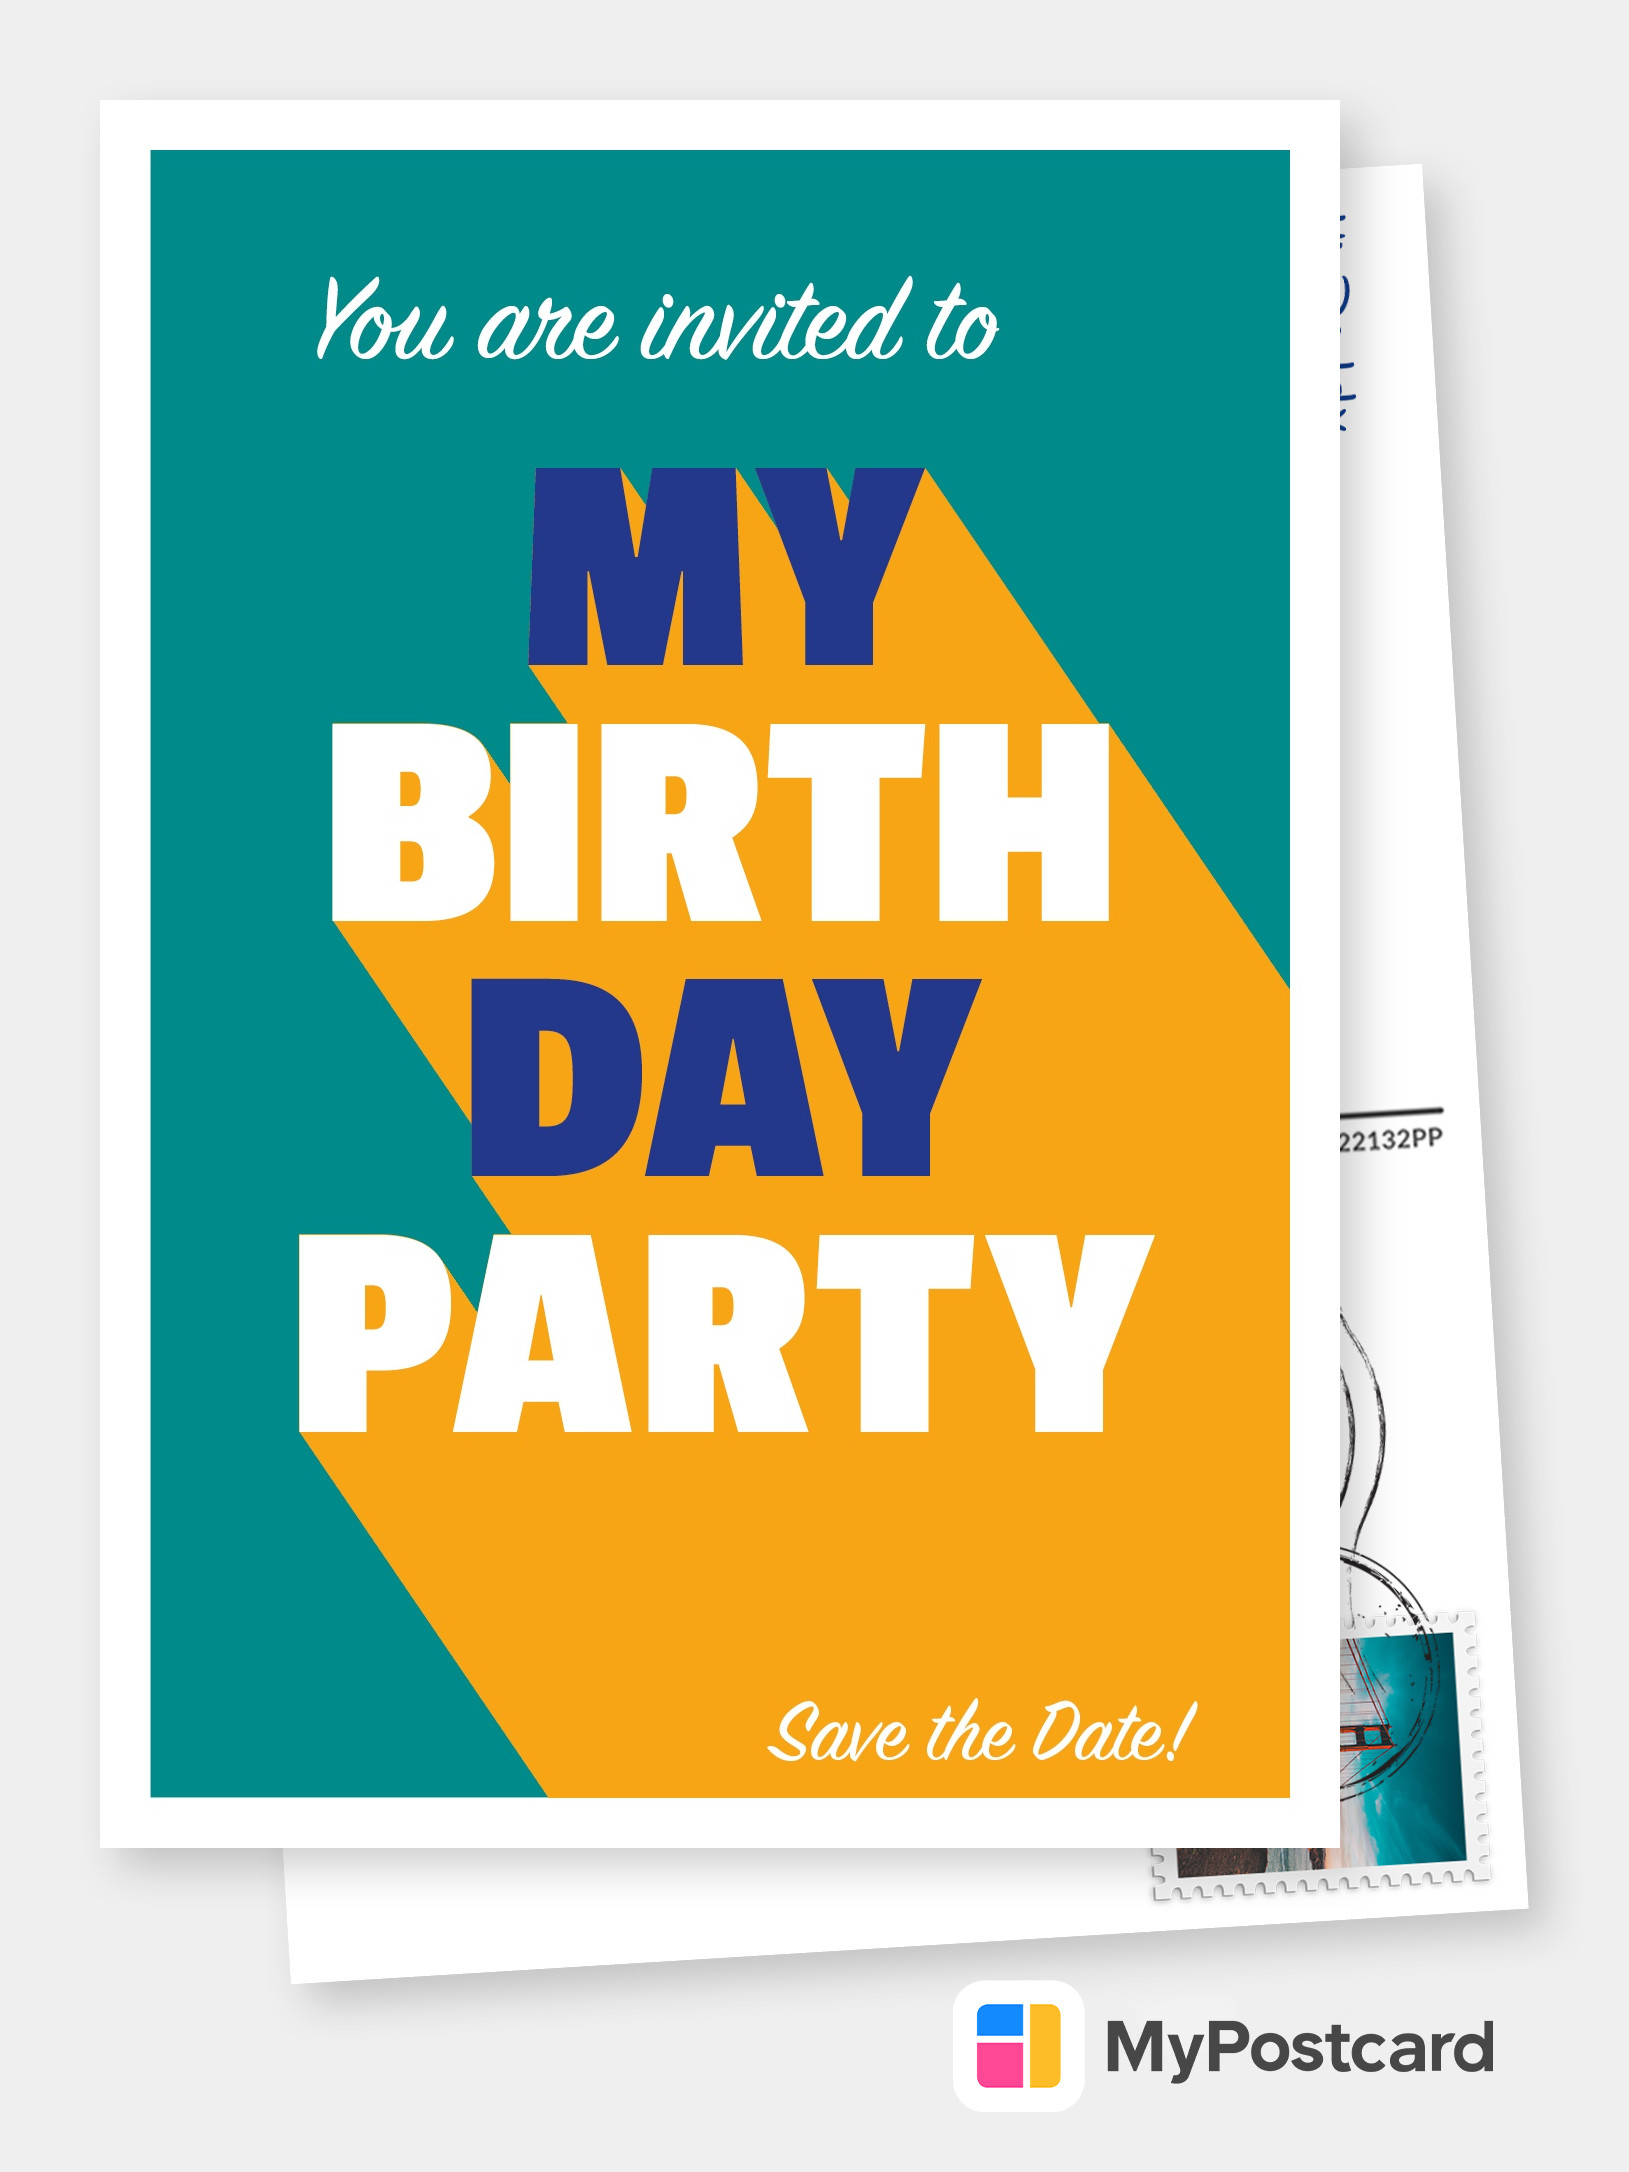 Invitation Cards Printed And Mailed For You Directly To Your Recipients International Print And Mail Your Invitation Cards Free Shipping